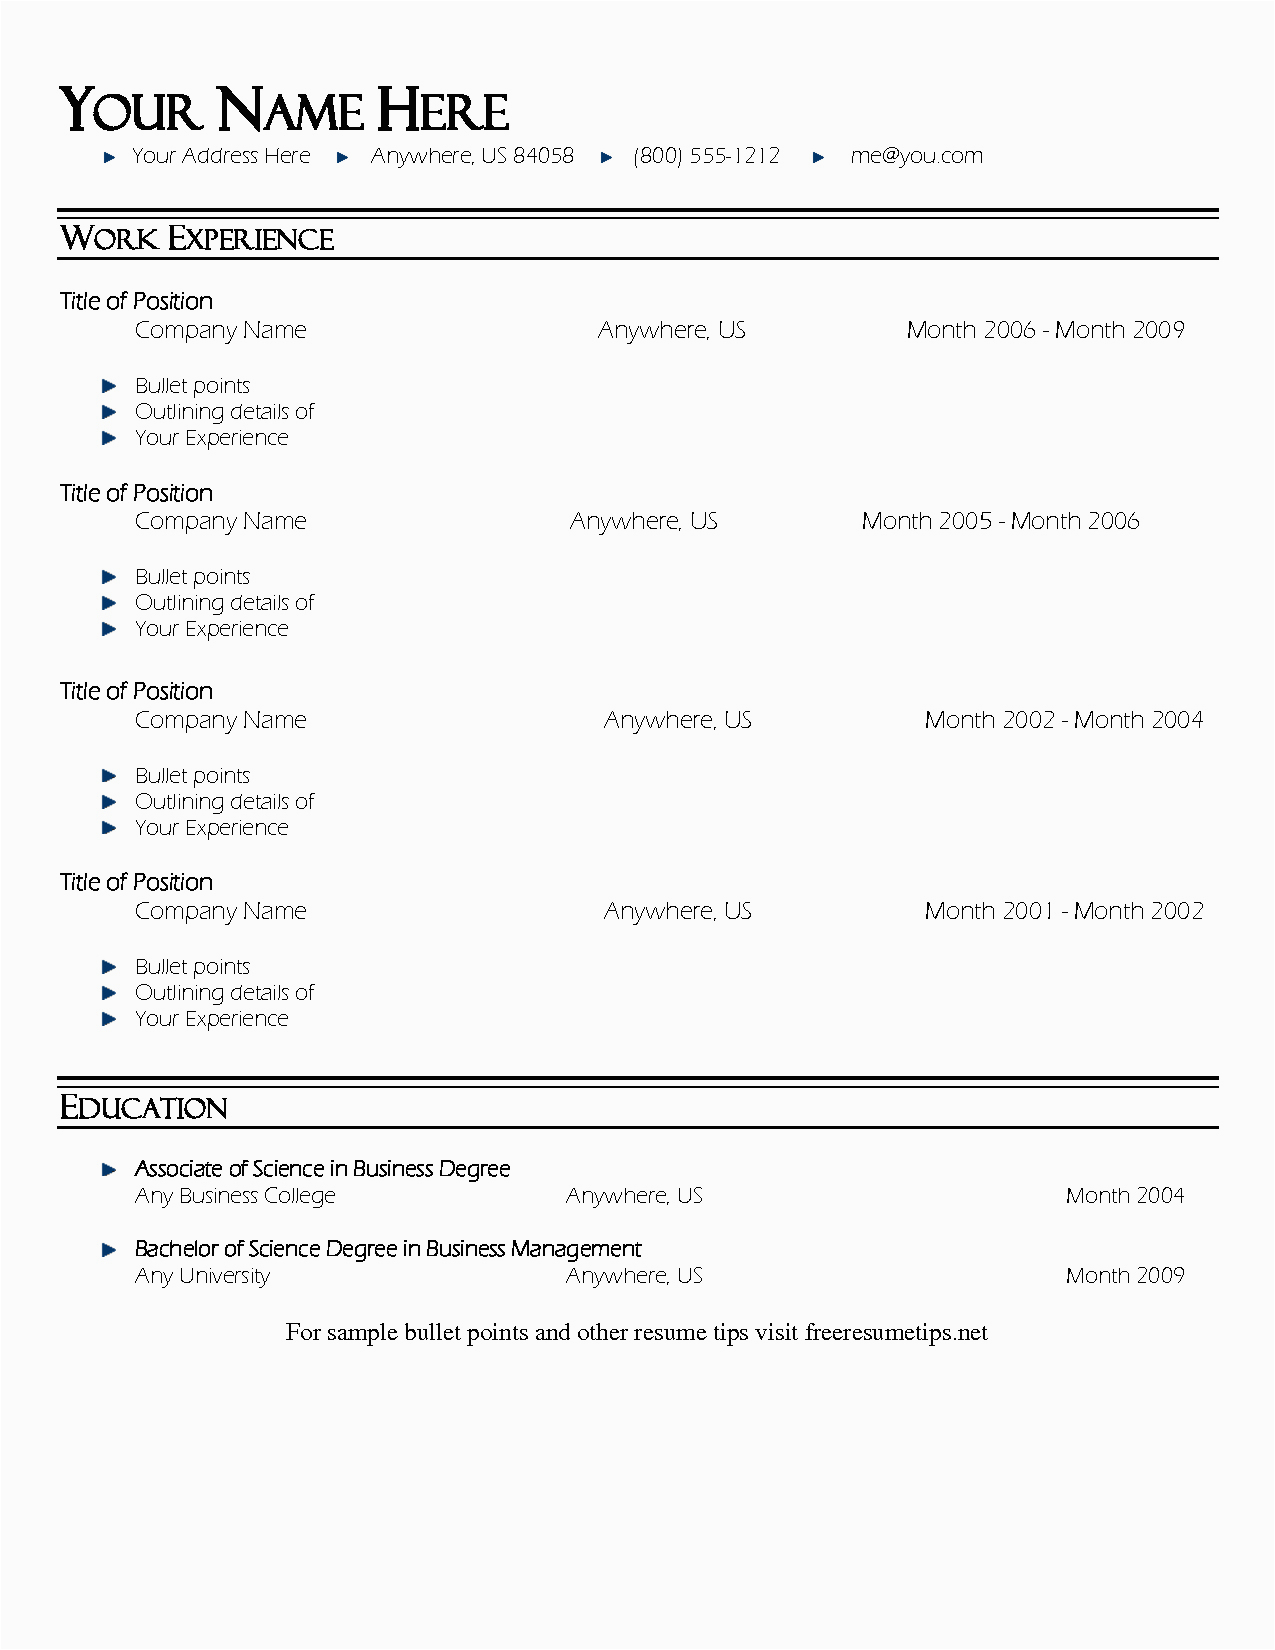 Free Resume Templates with Bullet Points Bullet Points Resume